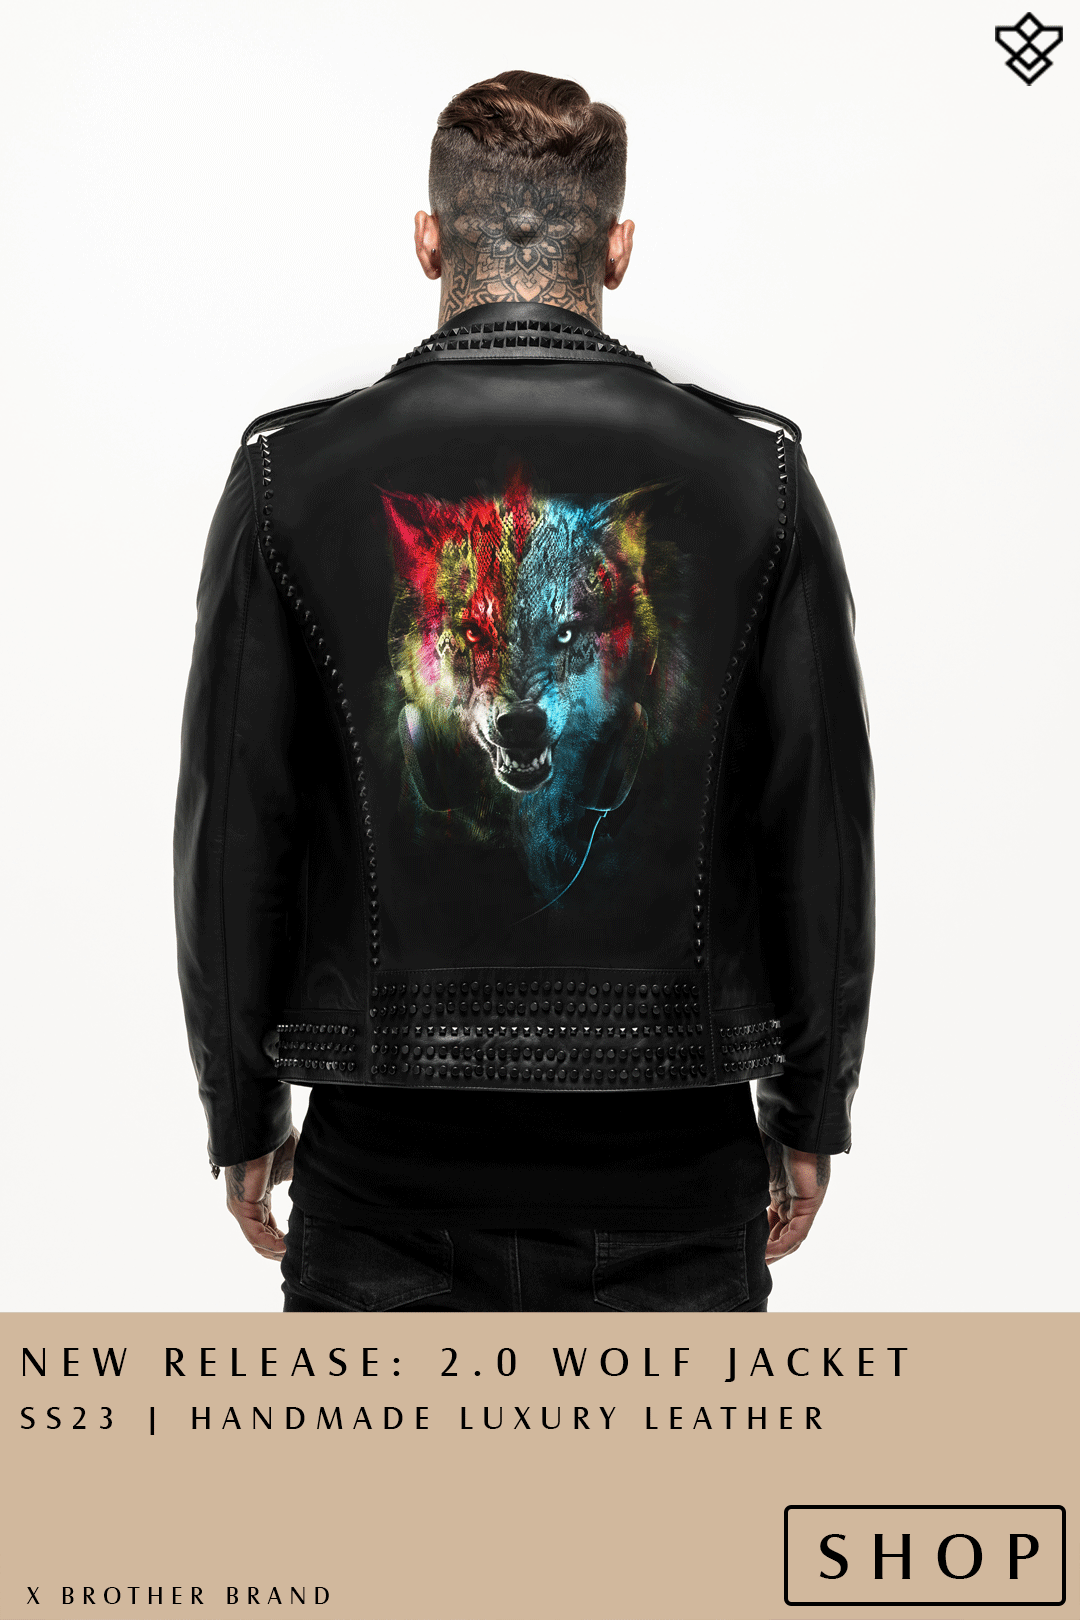  NEW RELEASE: 2.0 WOLF JACKET $S23 HANDMADE LUXURY LEATHER SHOP X BROTHER BRAND 